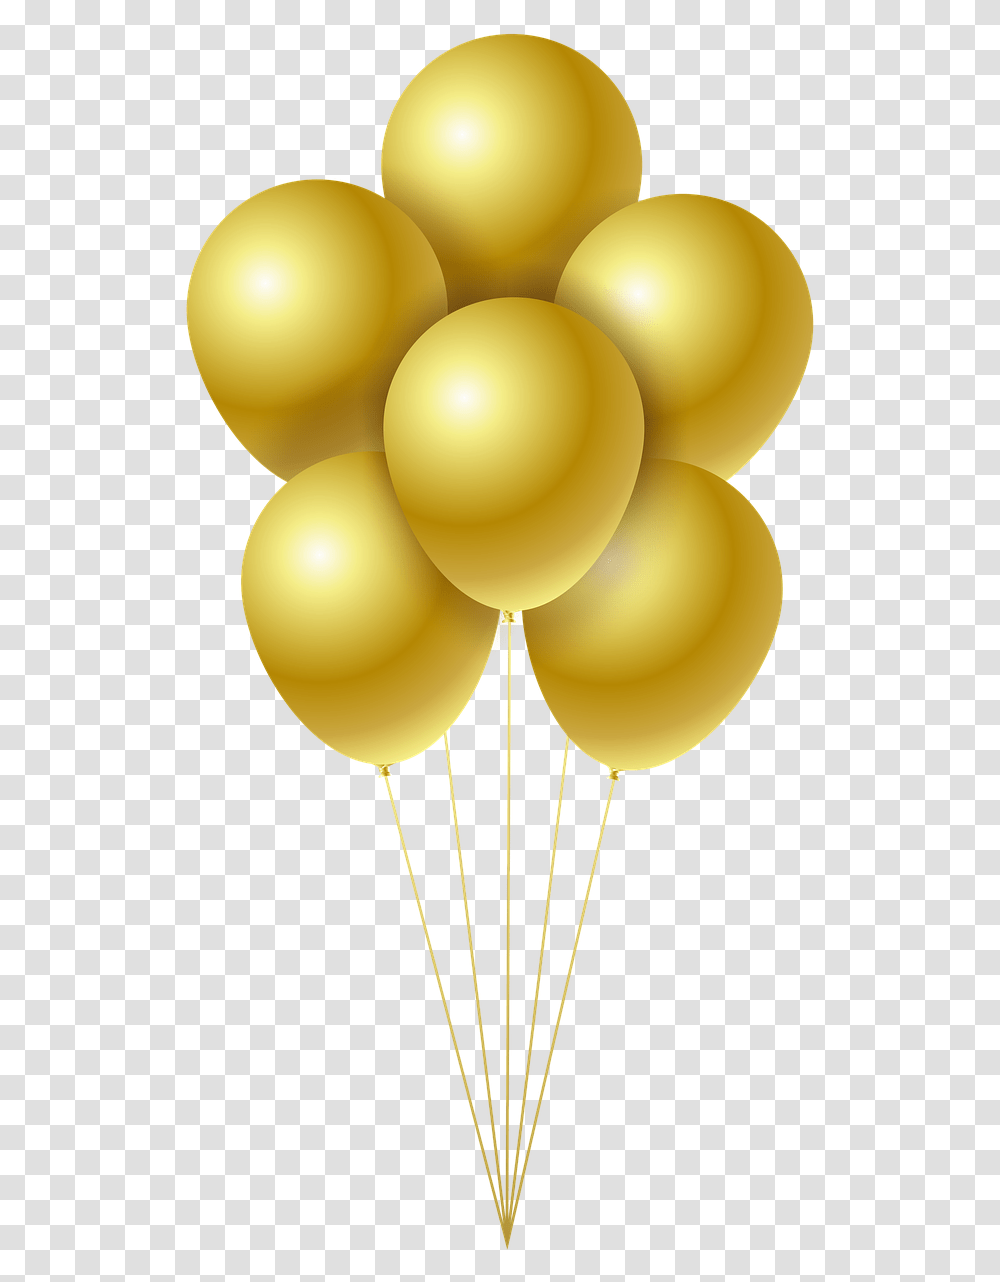 Download Hd Balloons Carnival Event Background Clear Background Golden Balloons, Lamp Transparent Png